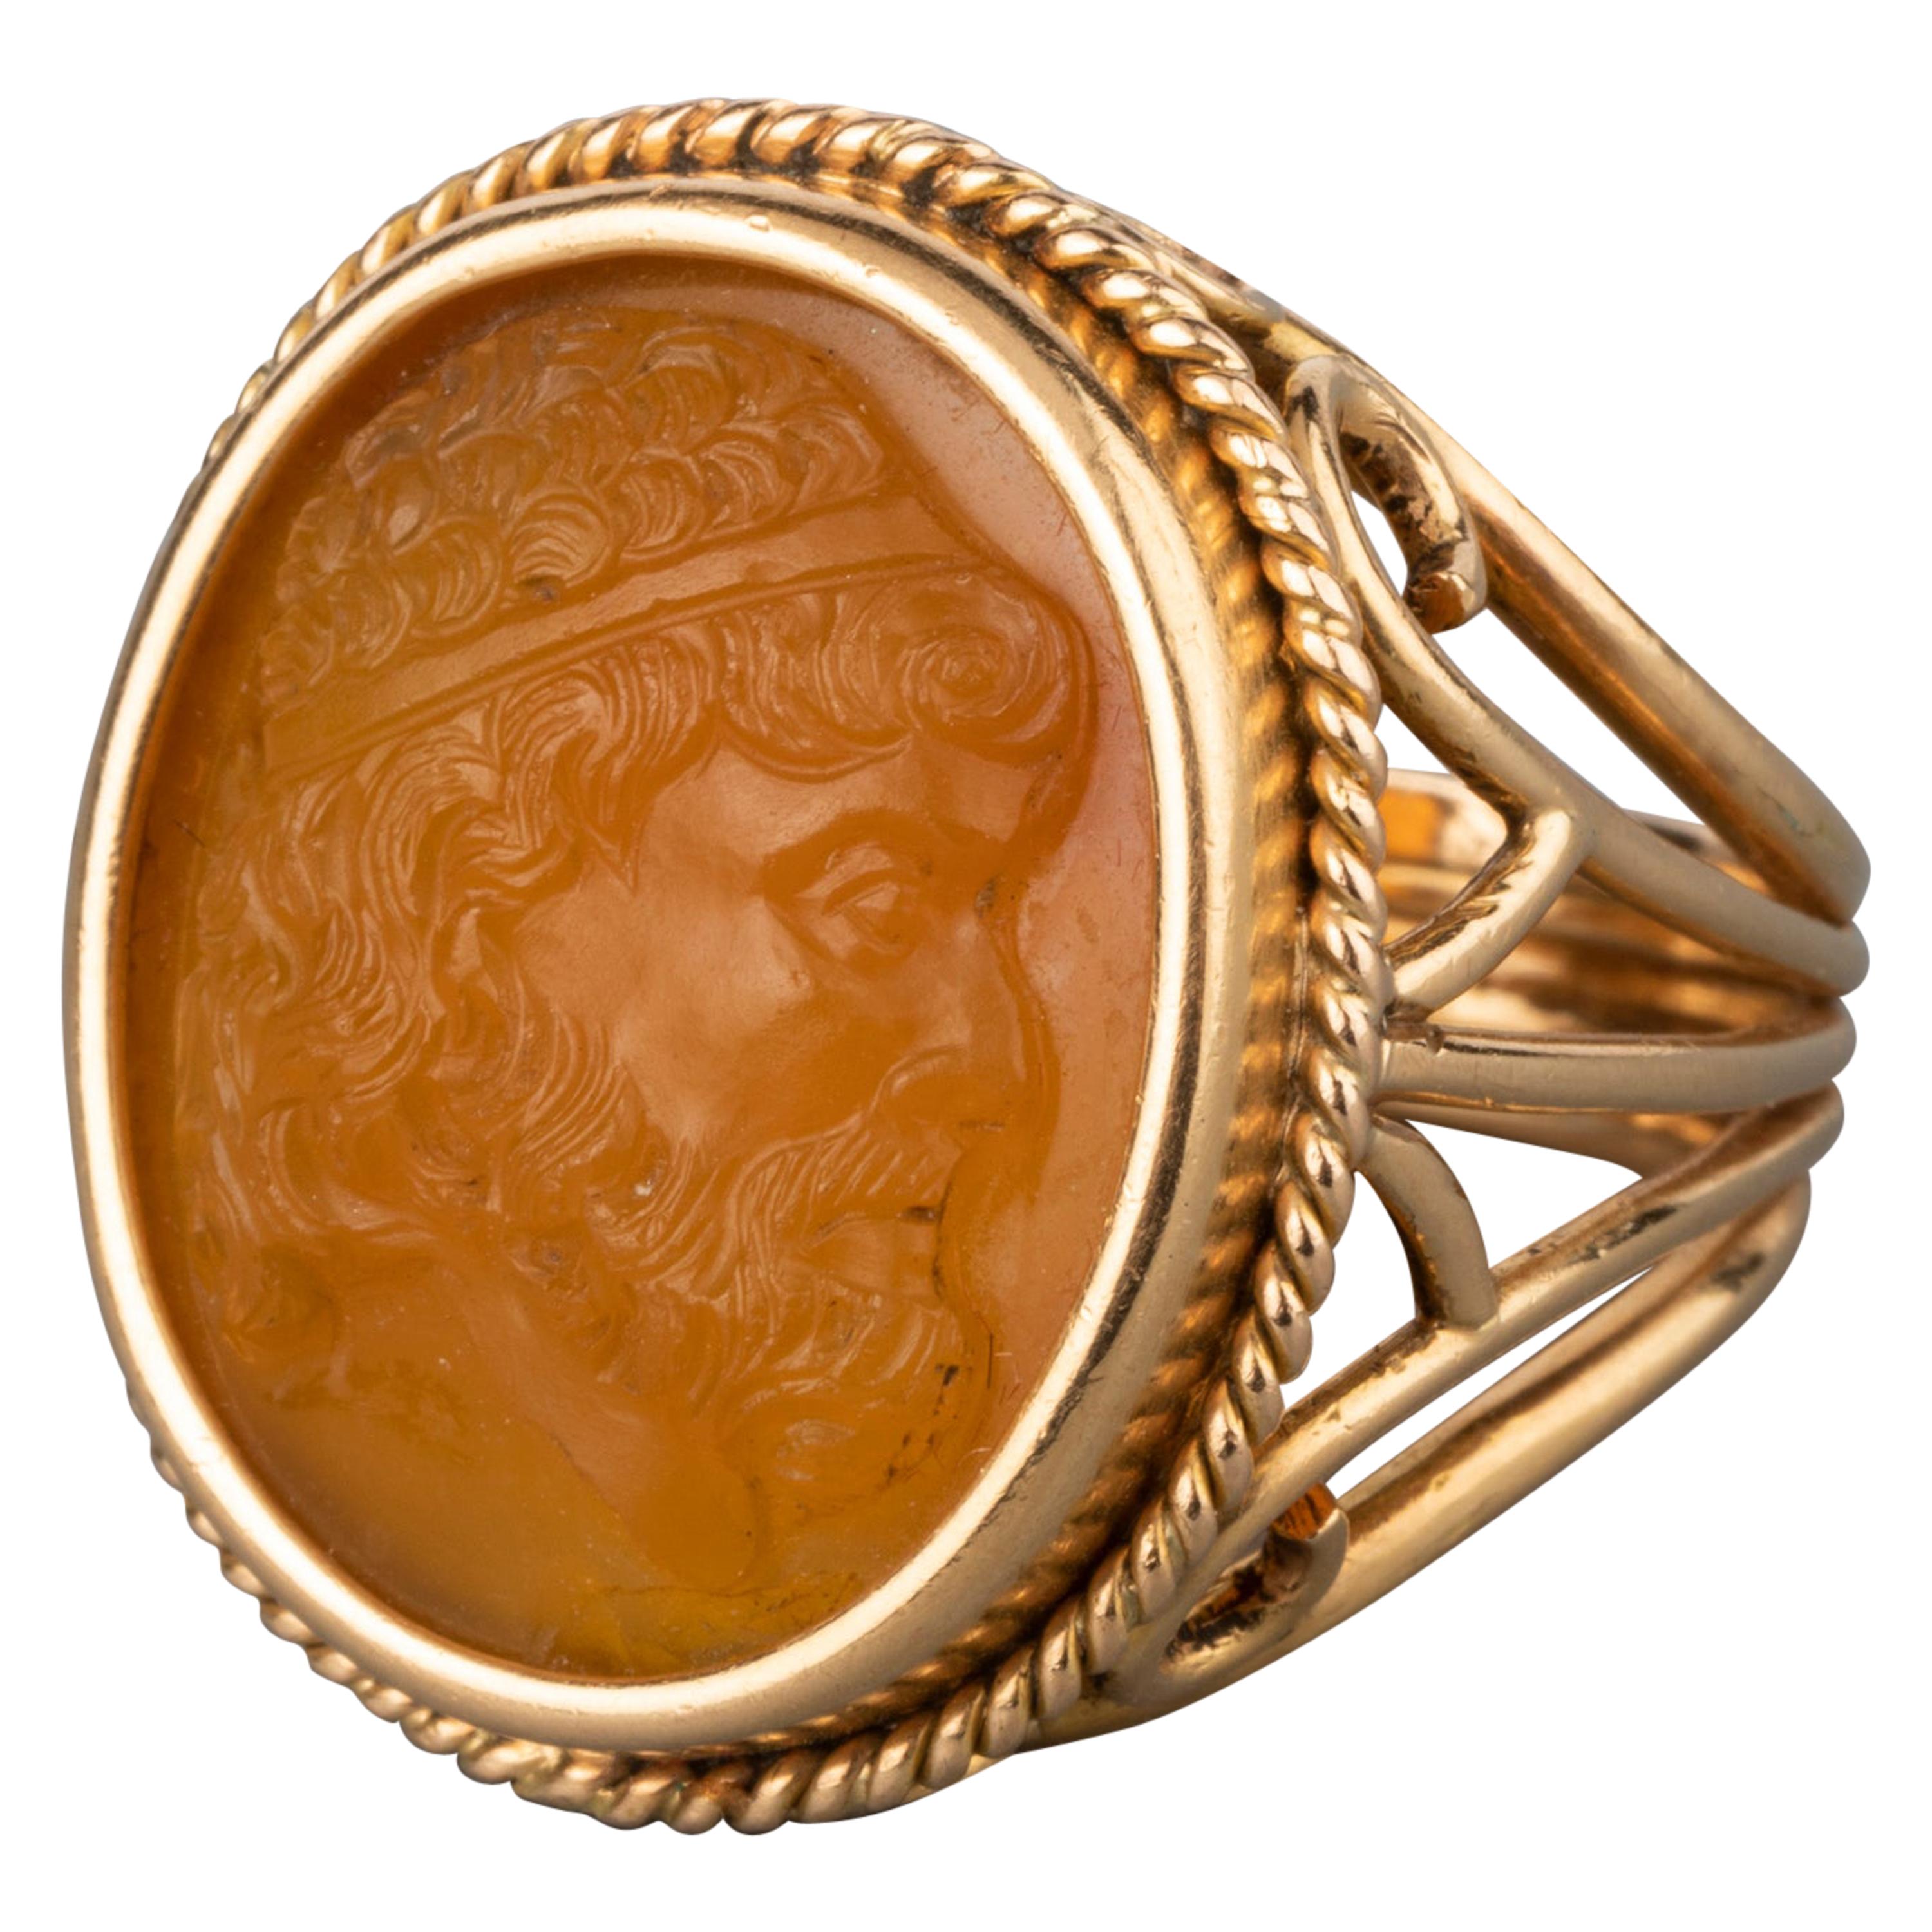 Antique Gold and Agate Cameo Ring